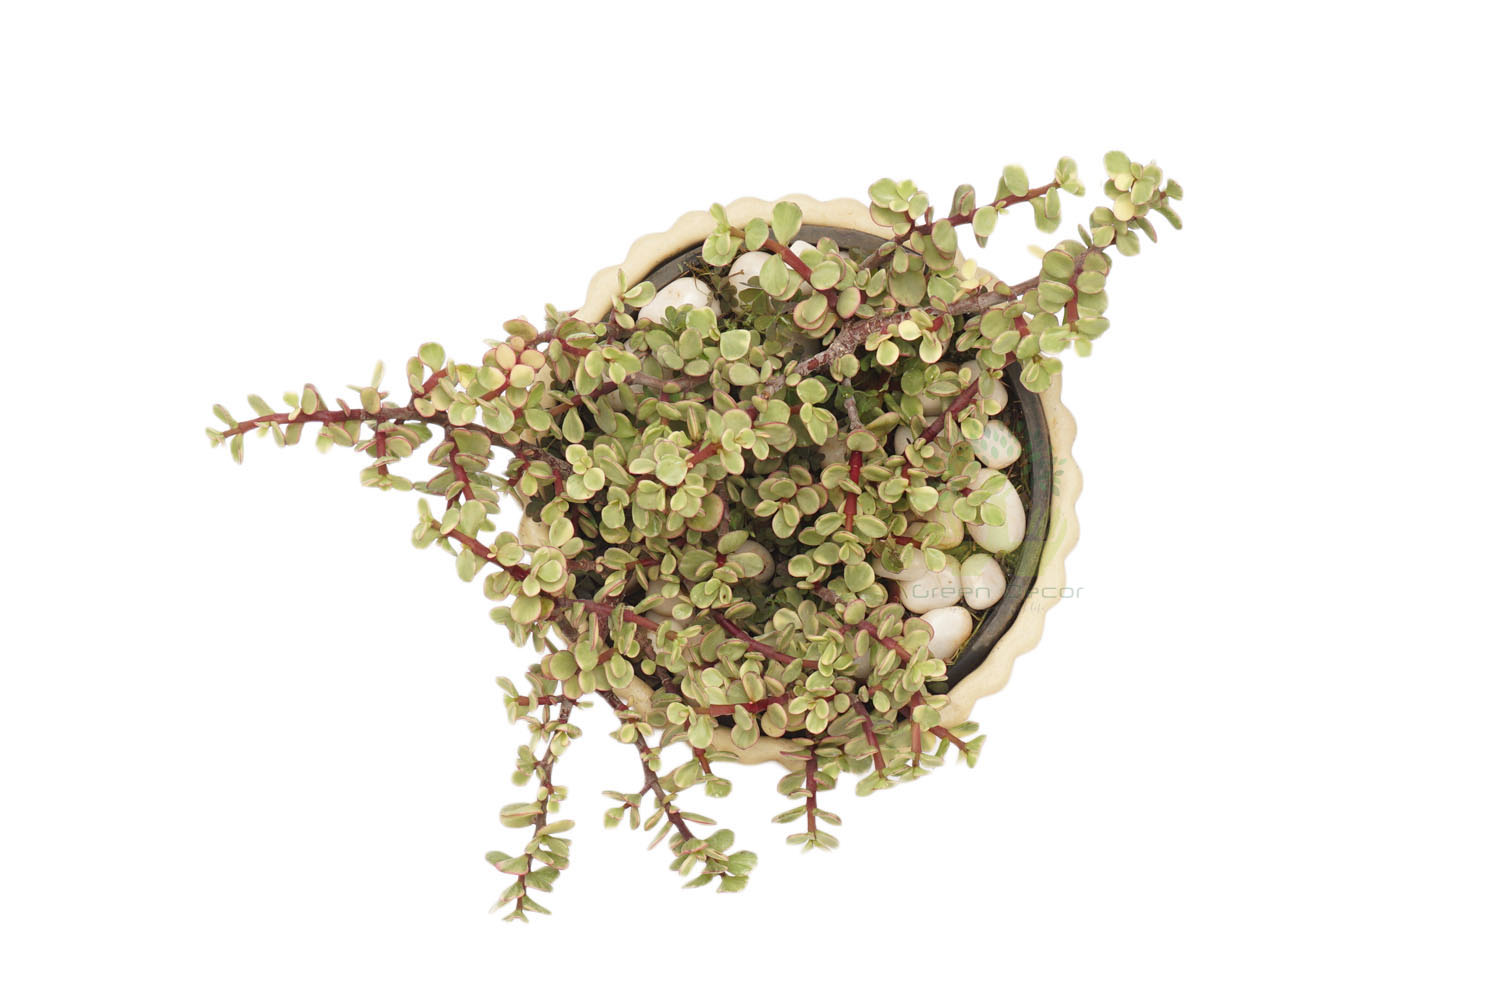 Buy Jade Variegated-Red Plants , White Pots and seeds in Delhi NCR by the best online nursery shop Greendecor.